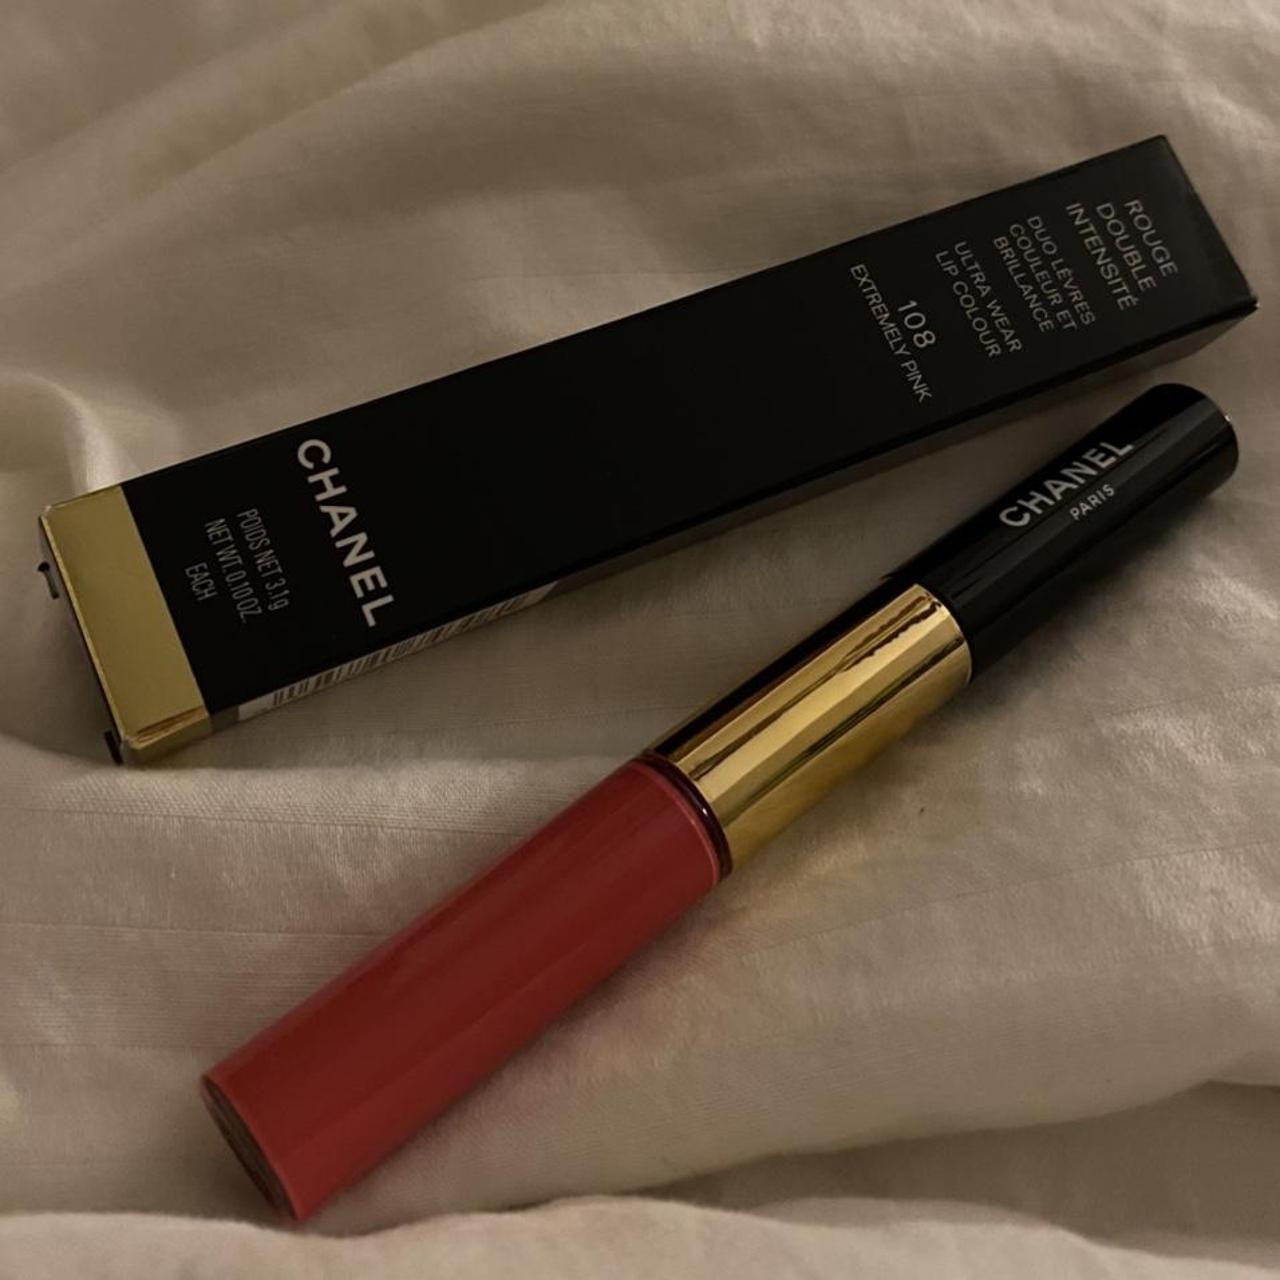 Chanel lip duo, transparent gloss+ extremely pink - Depop